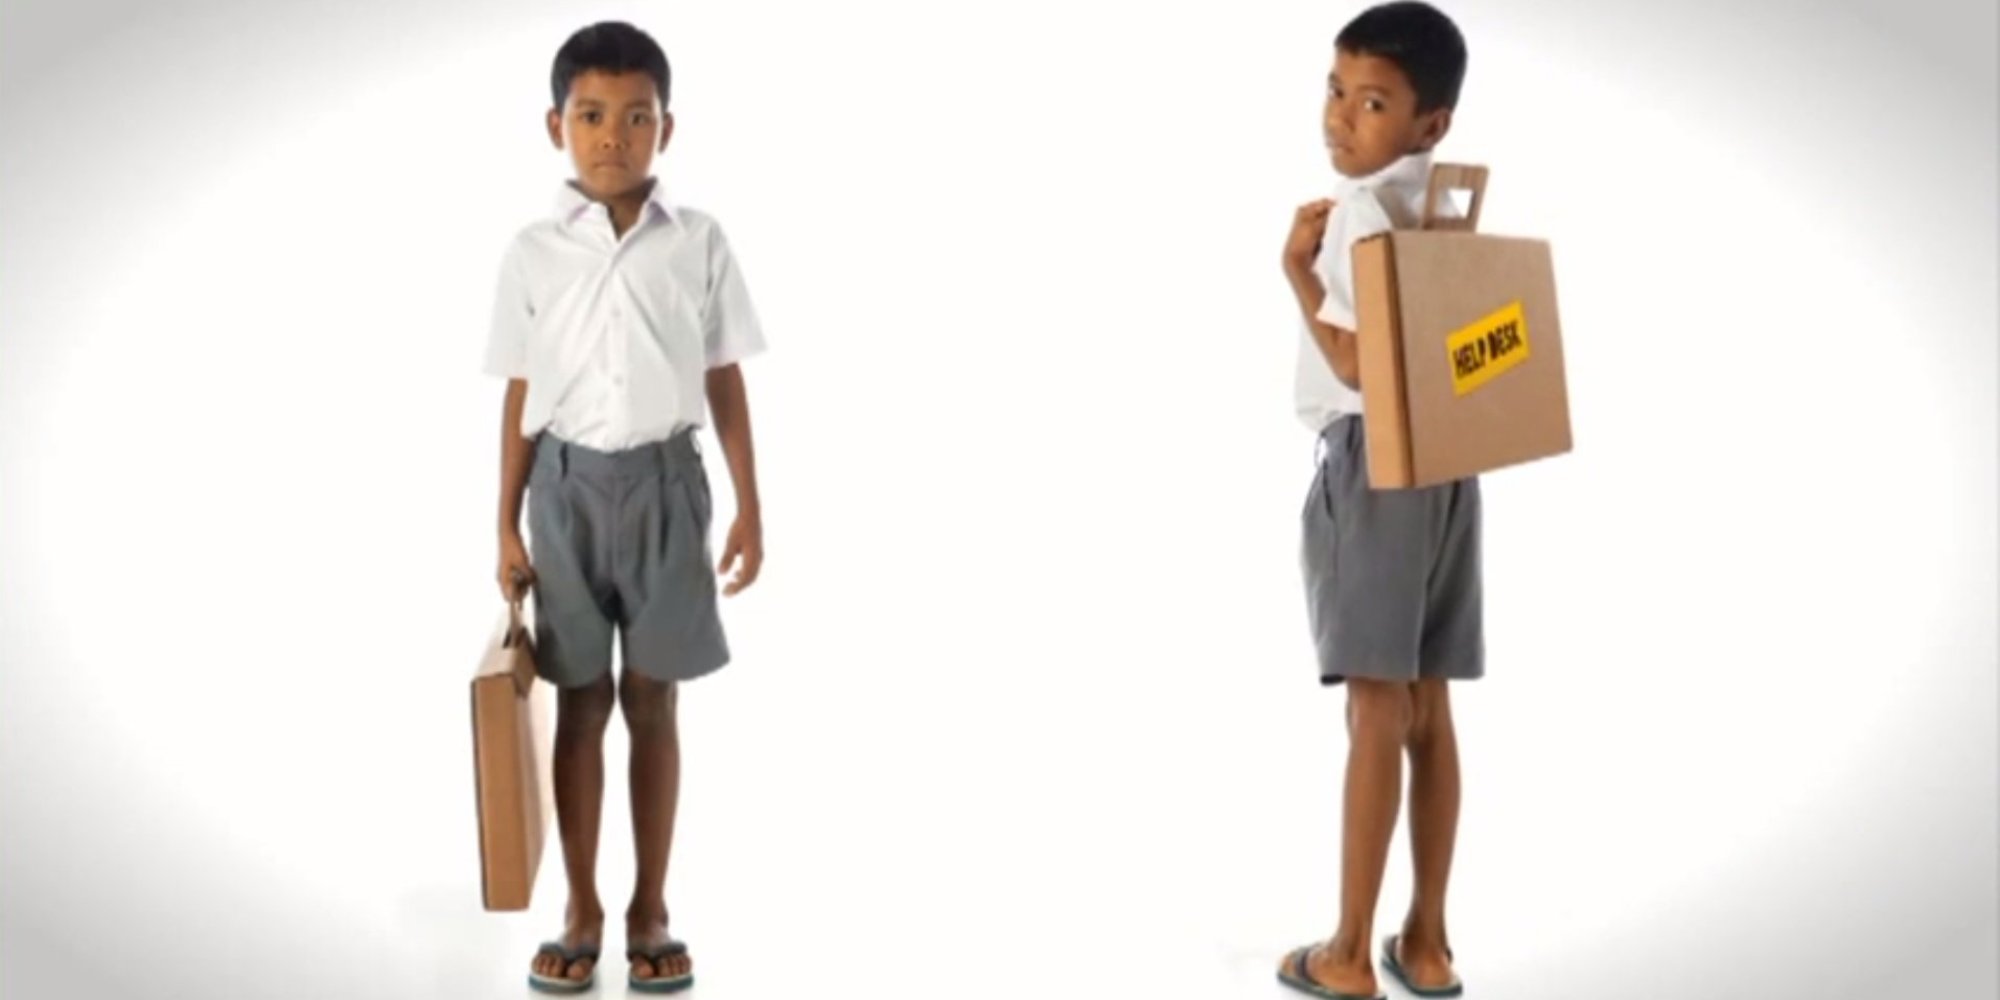 Recycled Cartons Create Genius Desks That Double As Backpacks For Needy Kids In India